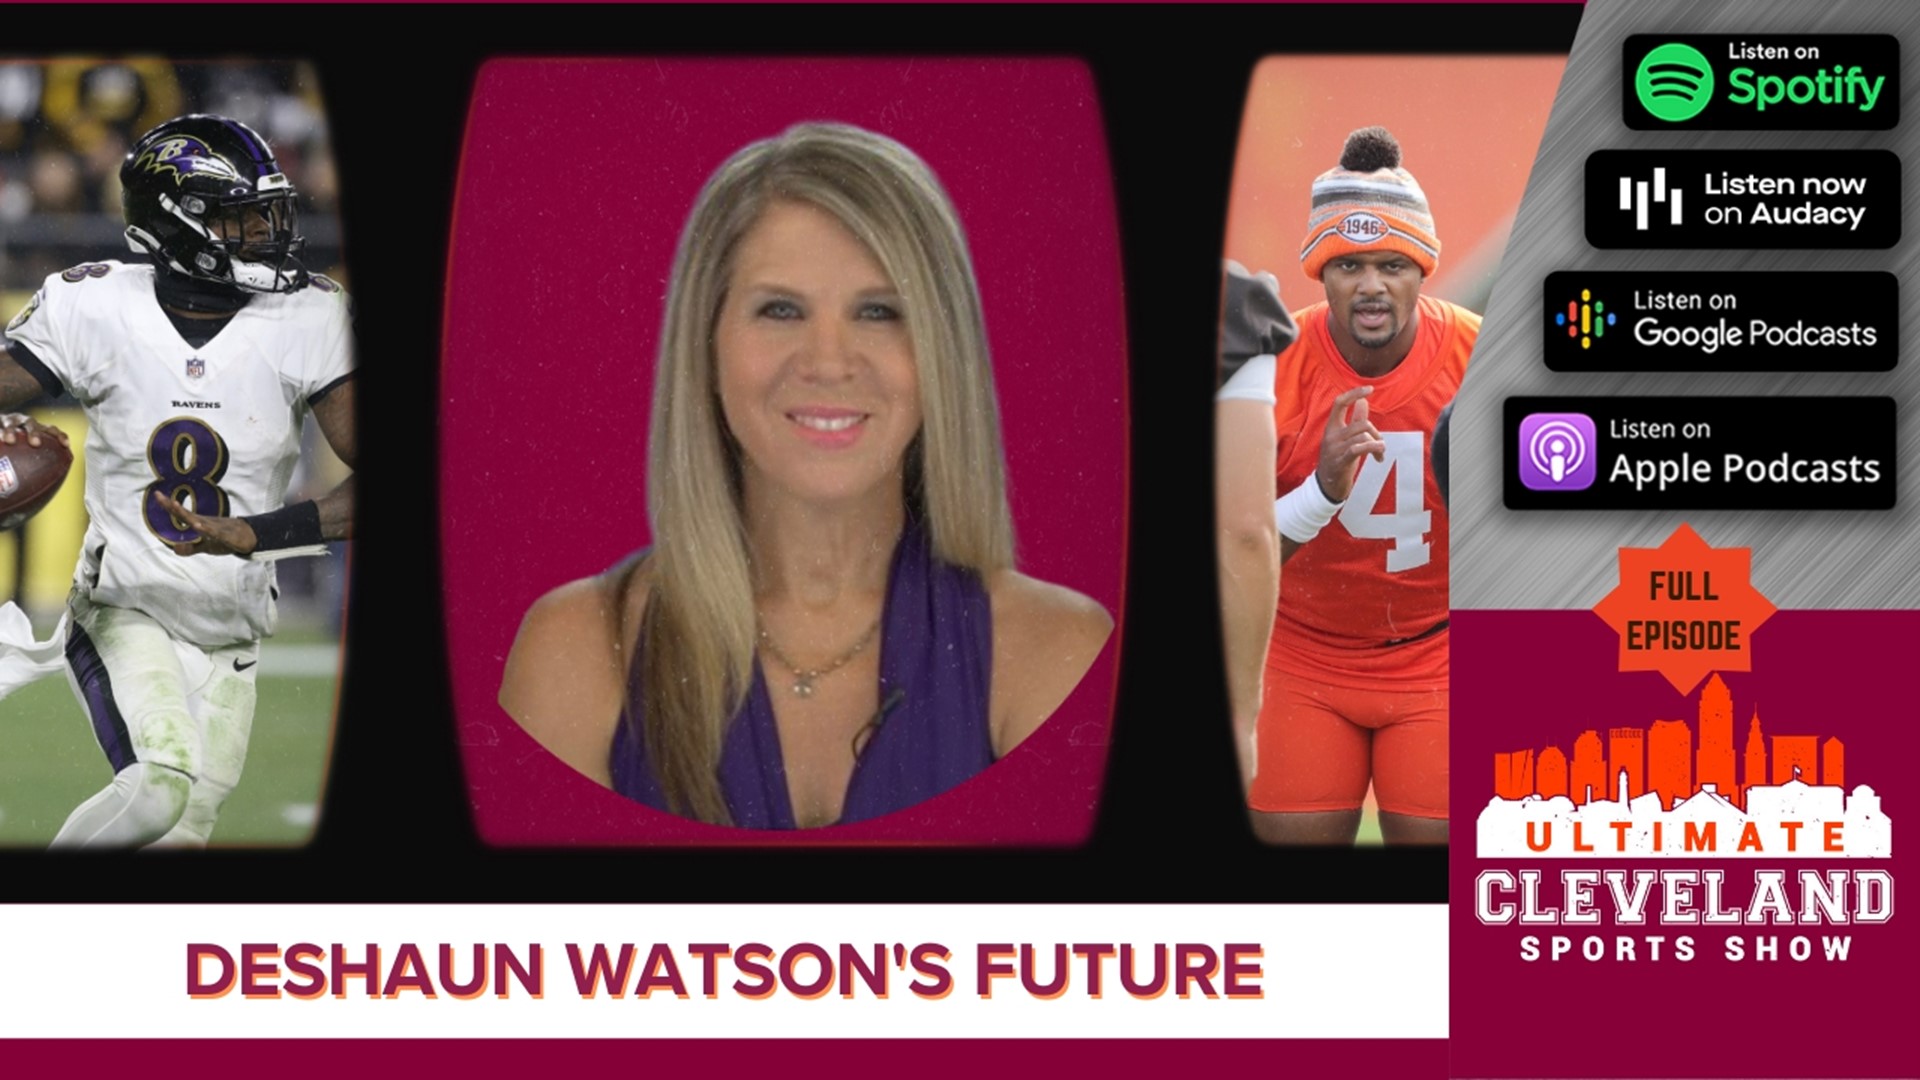 The UCSS crew compares Deshaun Watson to Lamar Jackson based on AFC QB rankings, plus Tim Couch and Mary Kay Cabot join to talk Cleveland Browns' upcoming season.